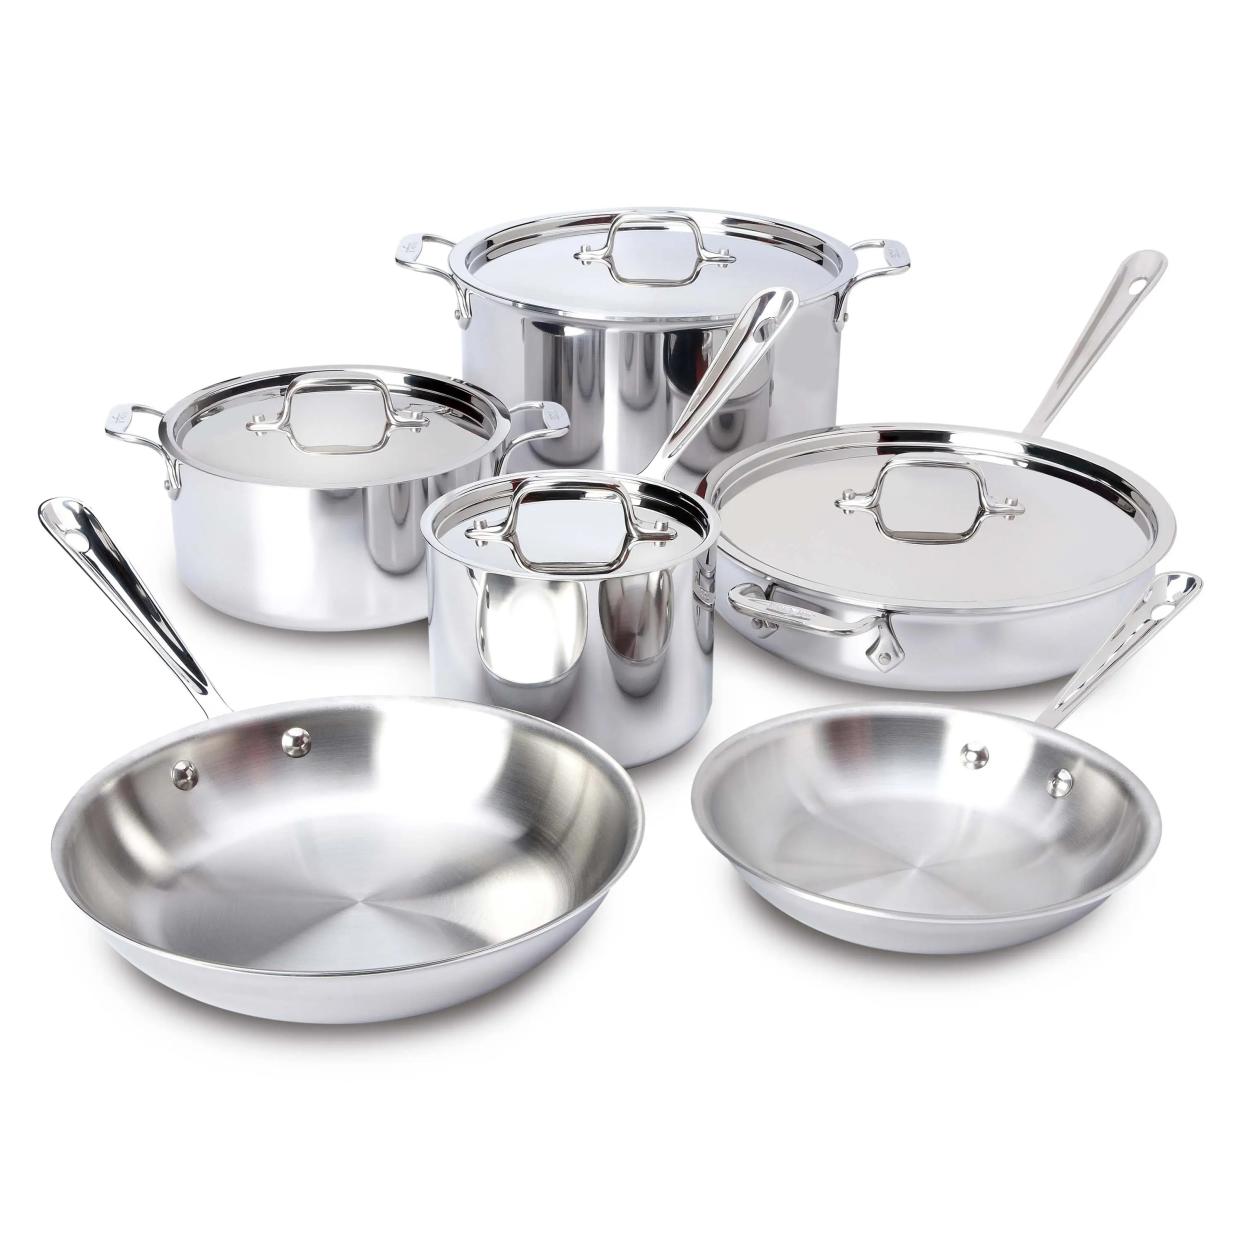 All-Clad 10-piece pan set, wedding registry gifts for guys